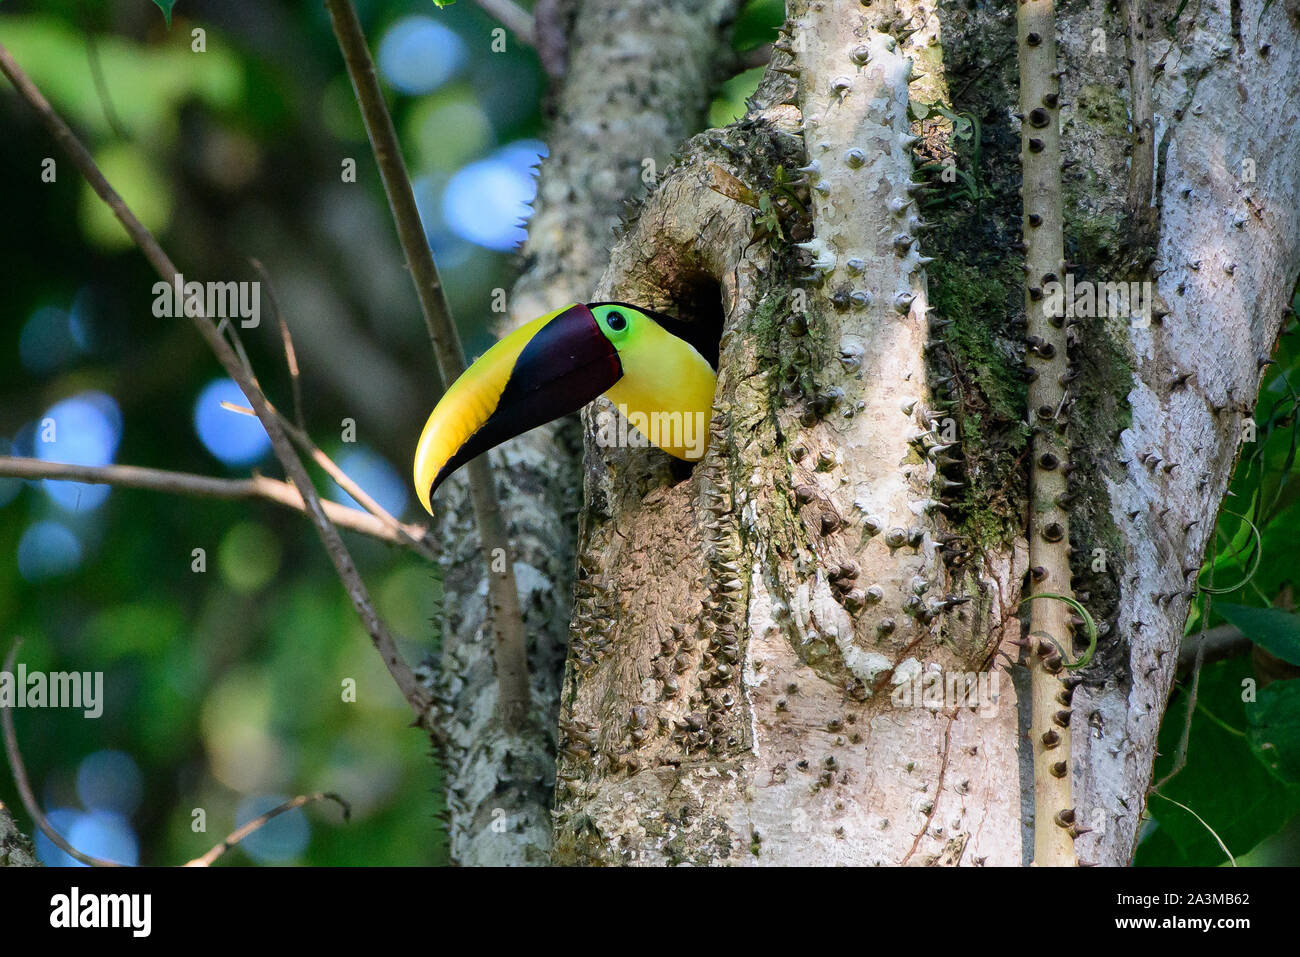 Black mandibled toucan peering out of its nest hole Stock Photo